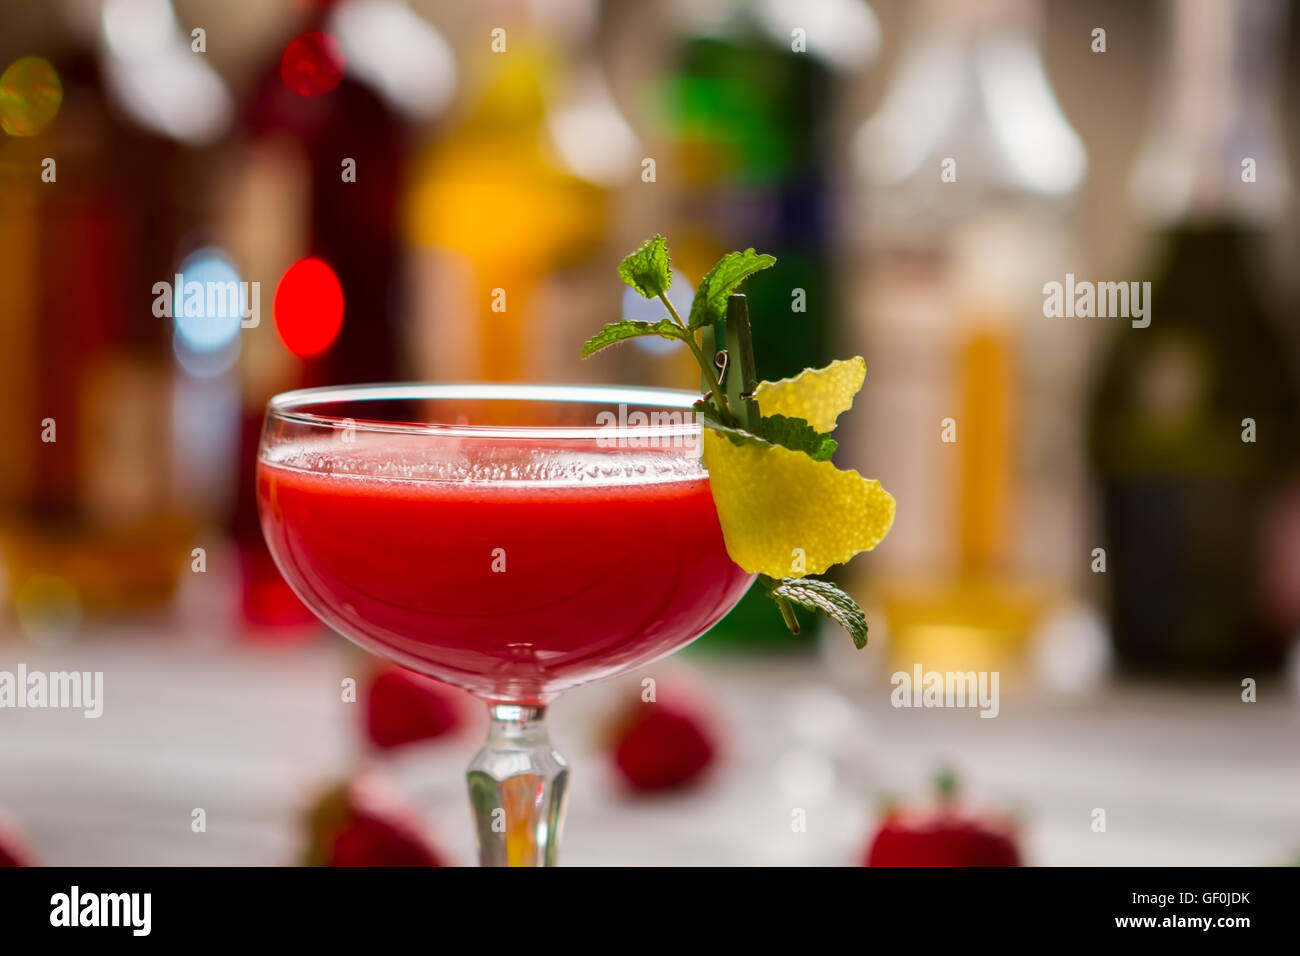 Glass with bright red cocktail. Stock Photo